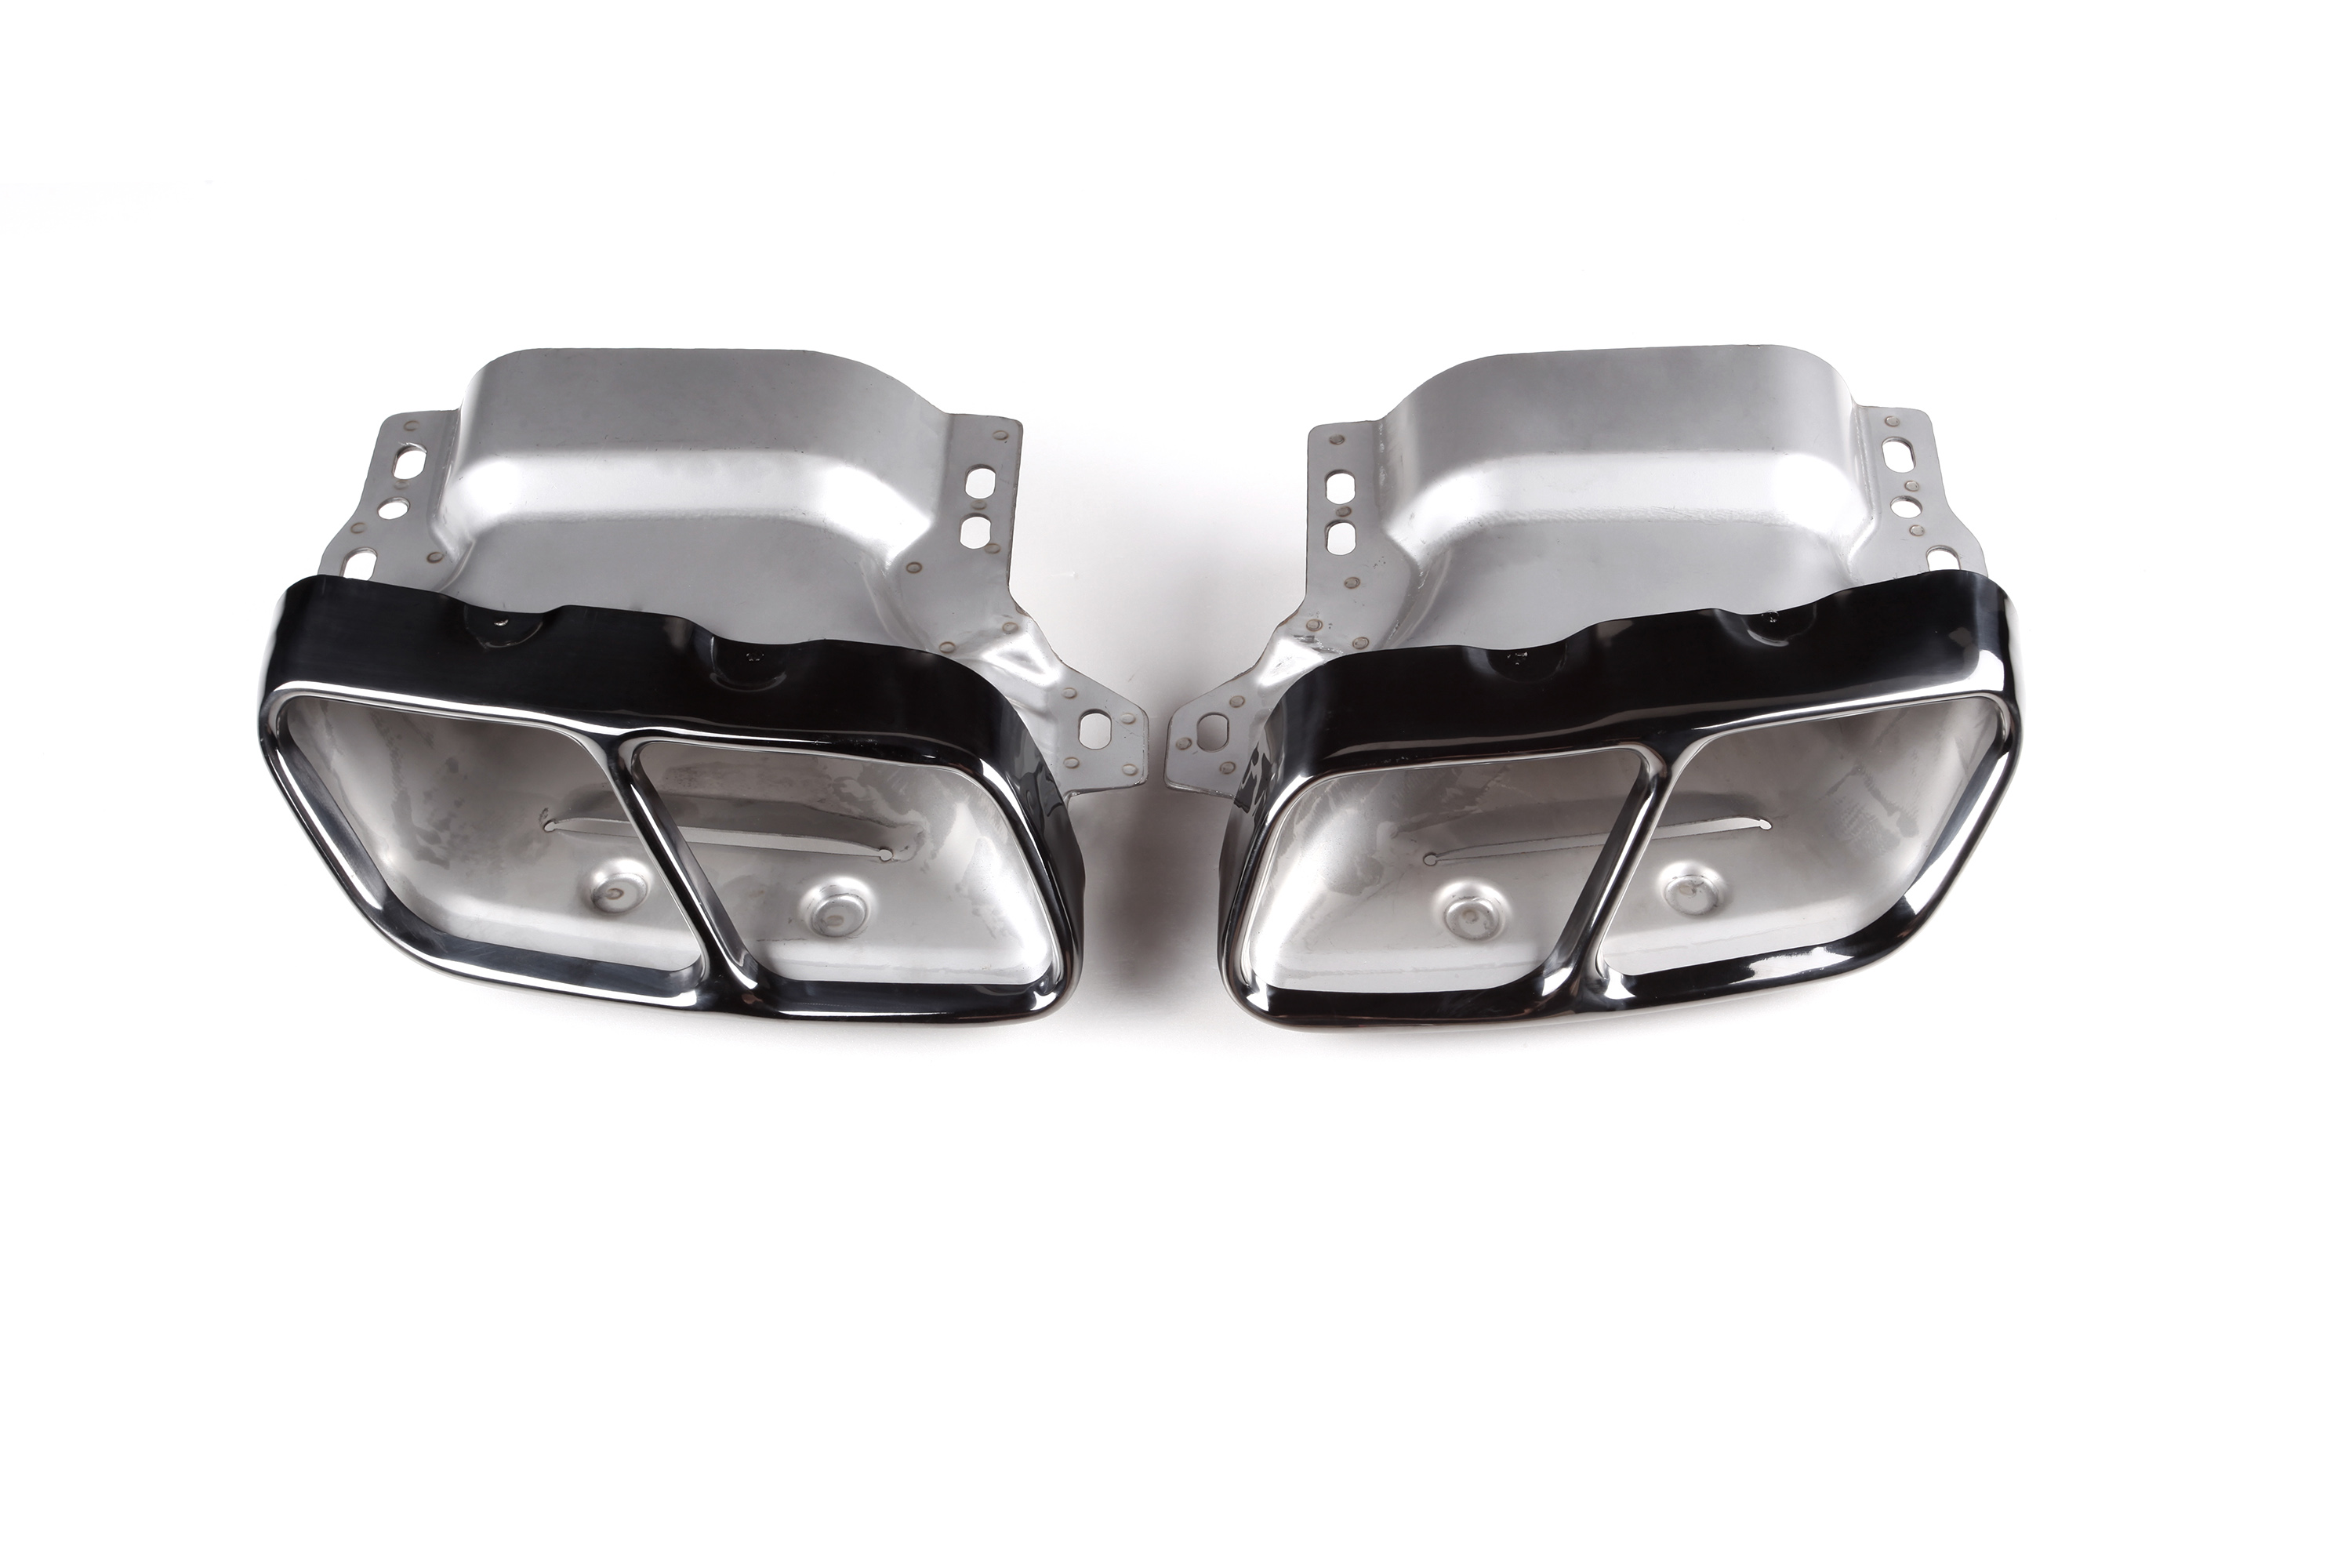 Zero Offset  AMG Style Rear Diffuser & Exhaust Tips for Mercedes CLA Class C117 Coupe / X117 Wagon 17-18 - MODE Auto Concepts